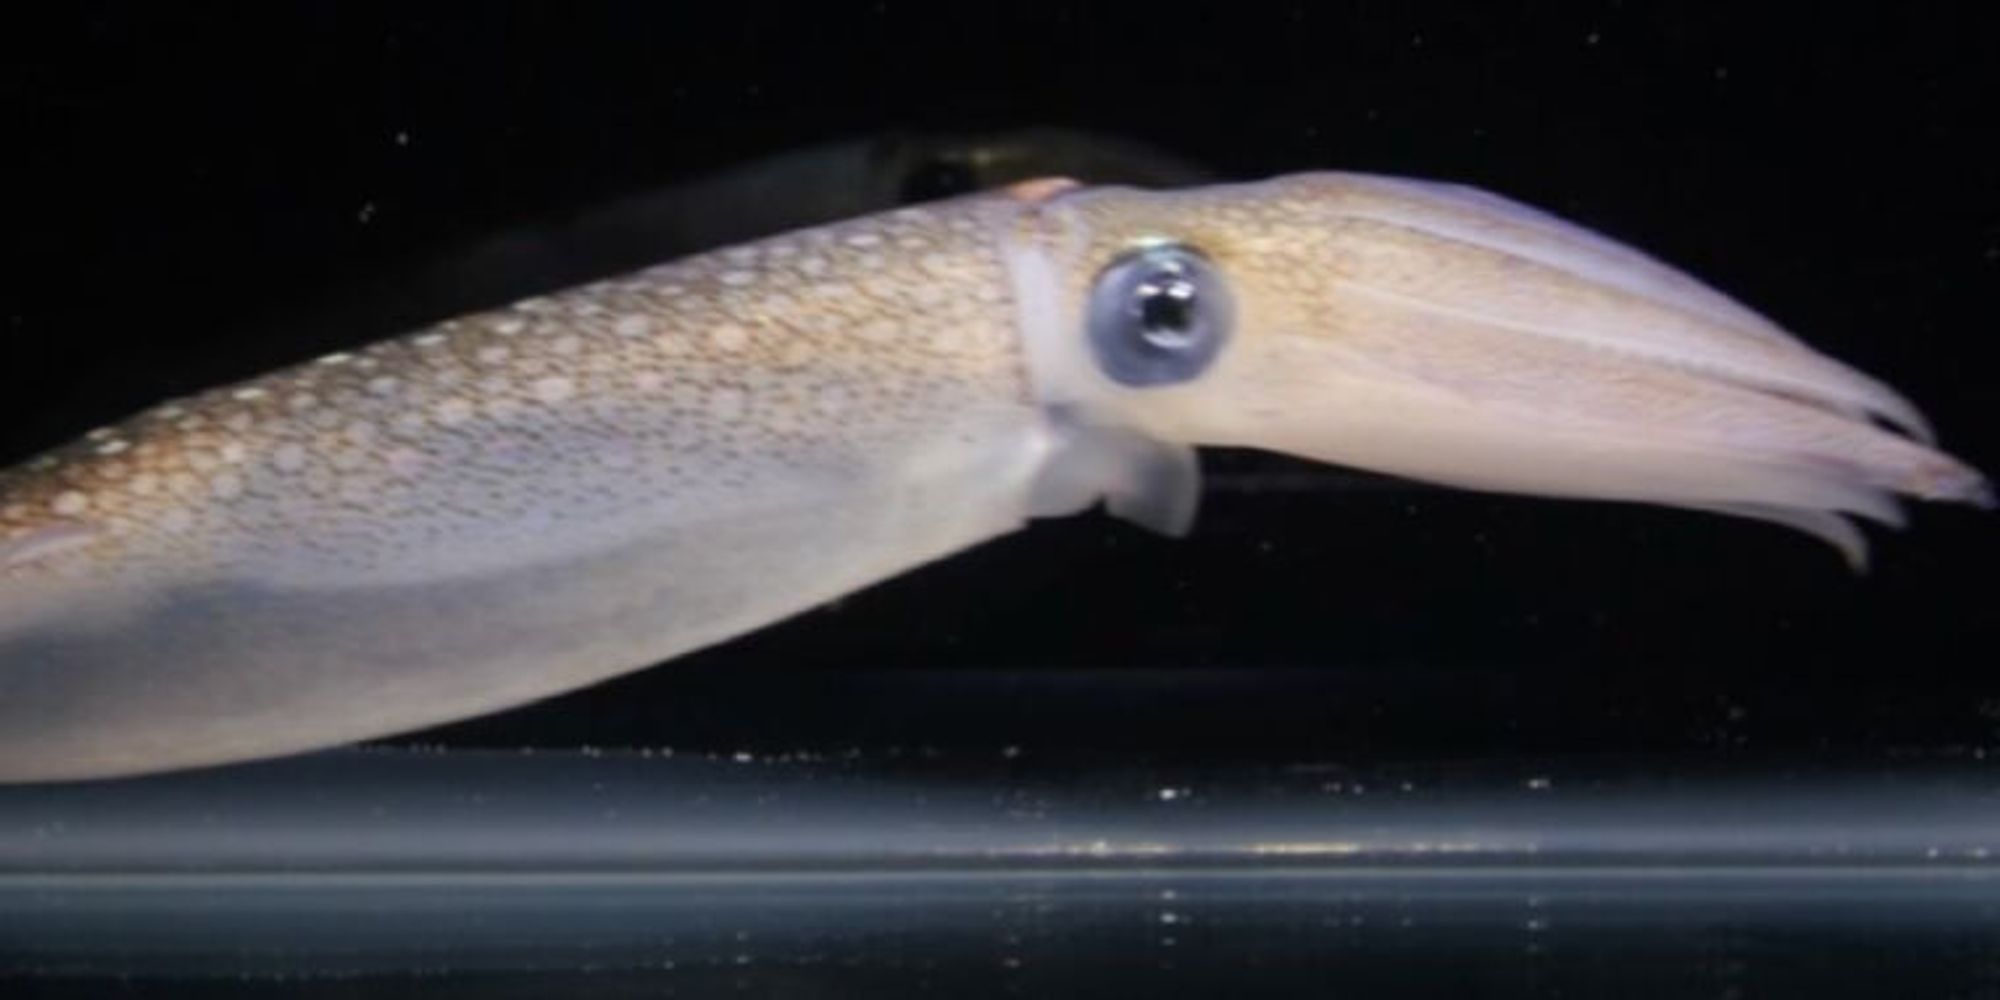 Human cells hacked to act like squid skin cells could unlock key to camouflage